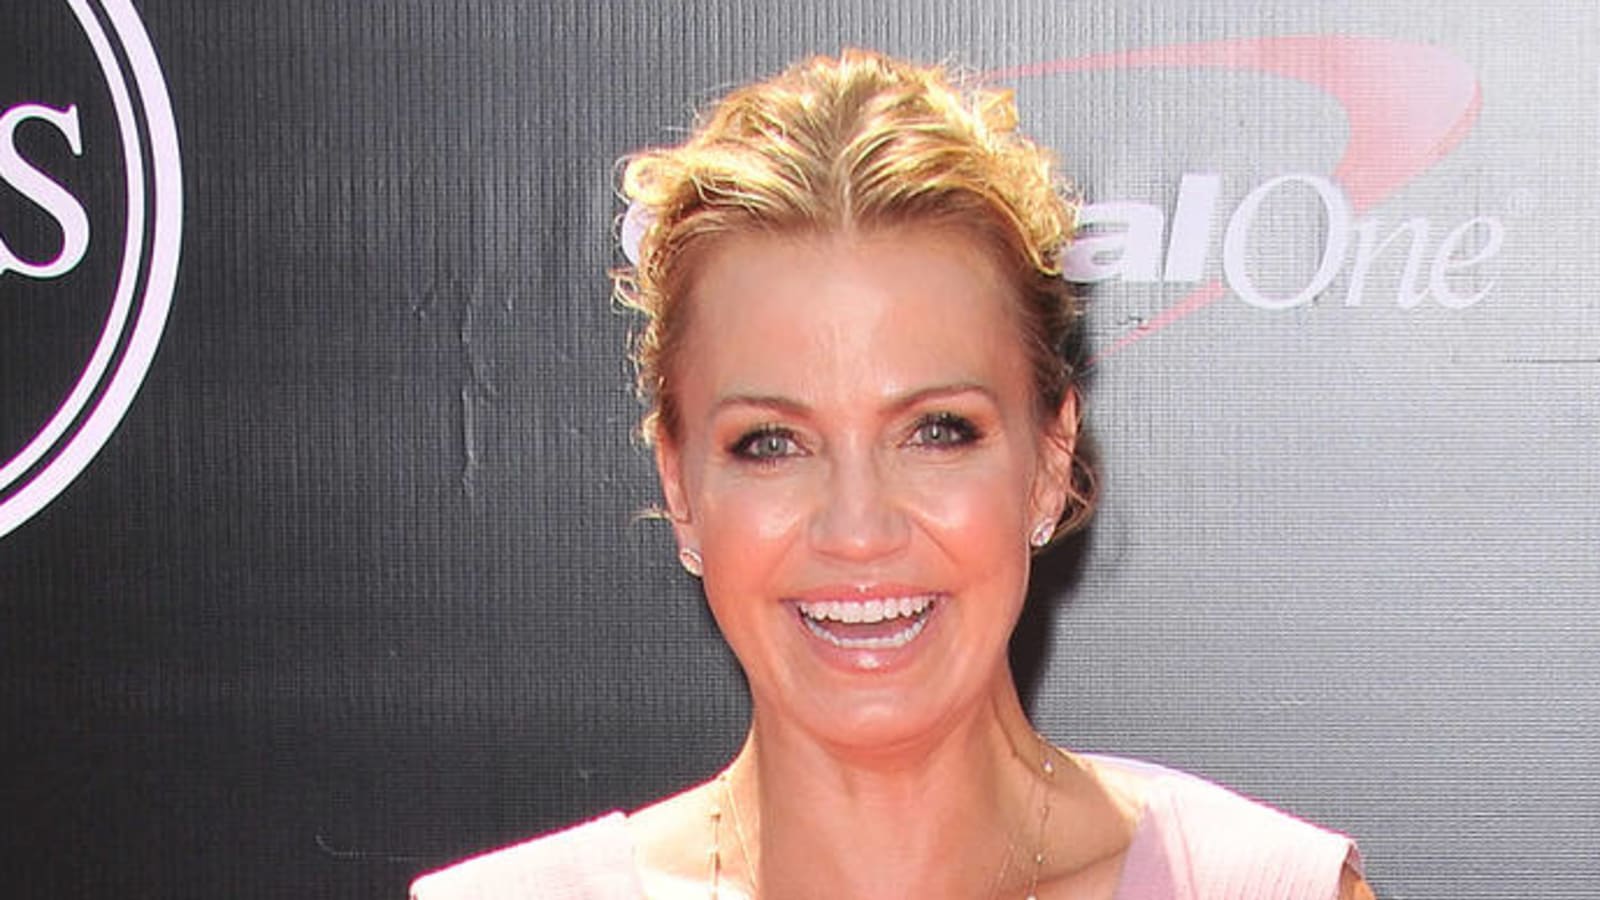 Michelle Beadle in talks with several sports media outlets?